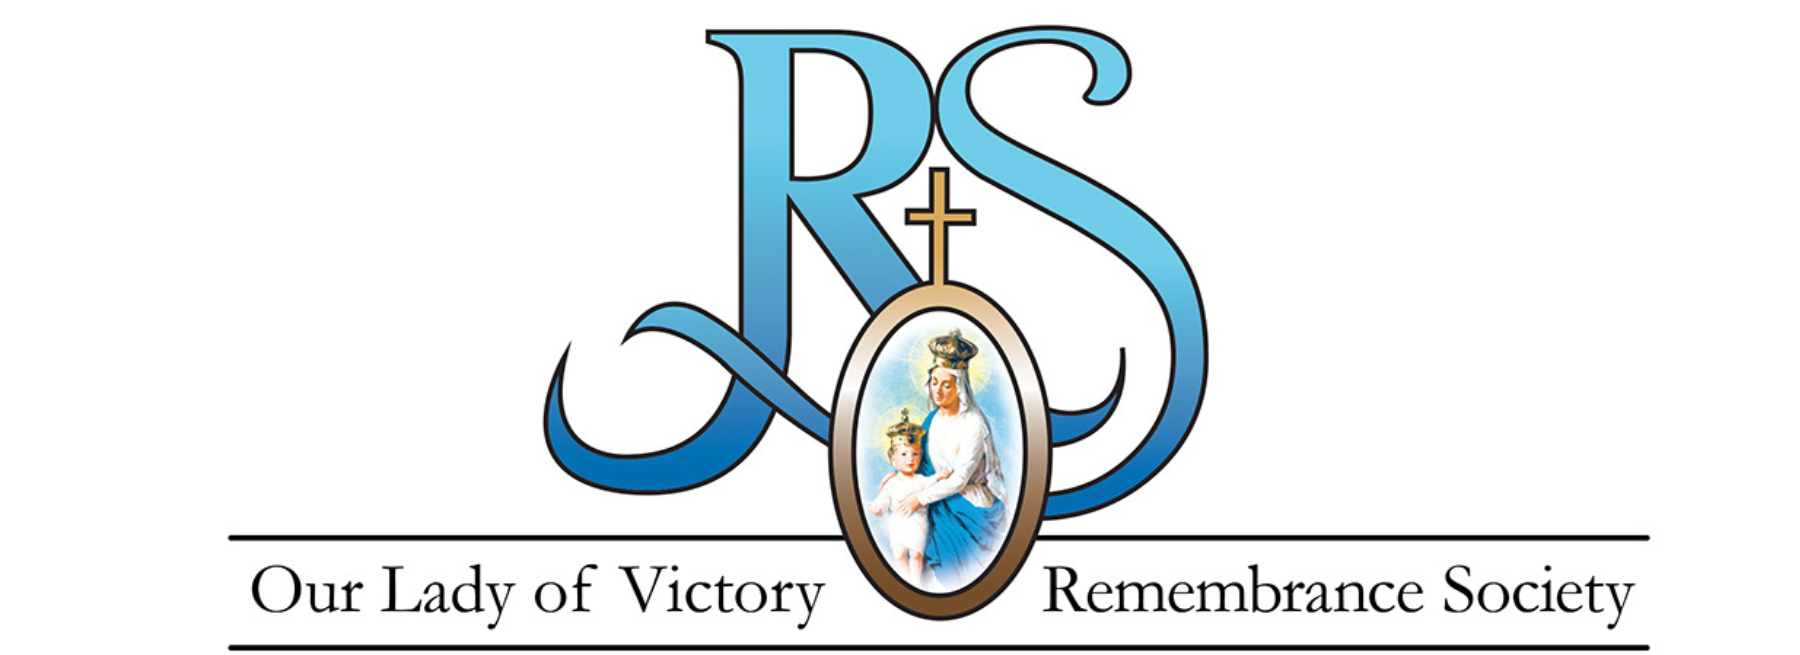 Our Lady of Victory Remembrance Society Banner